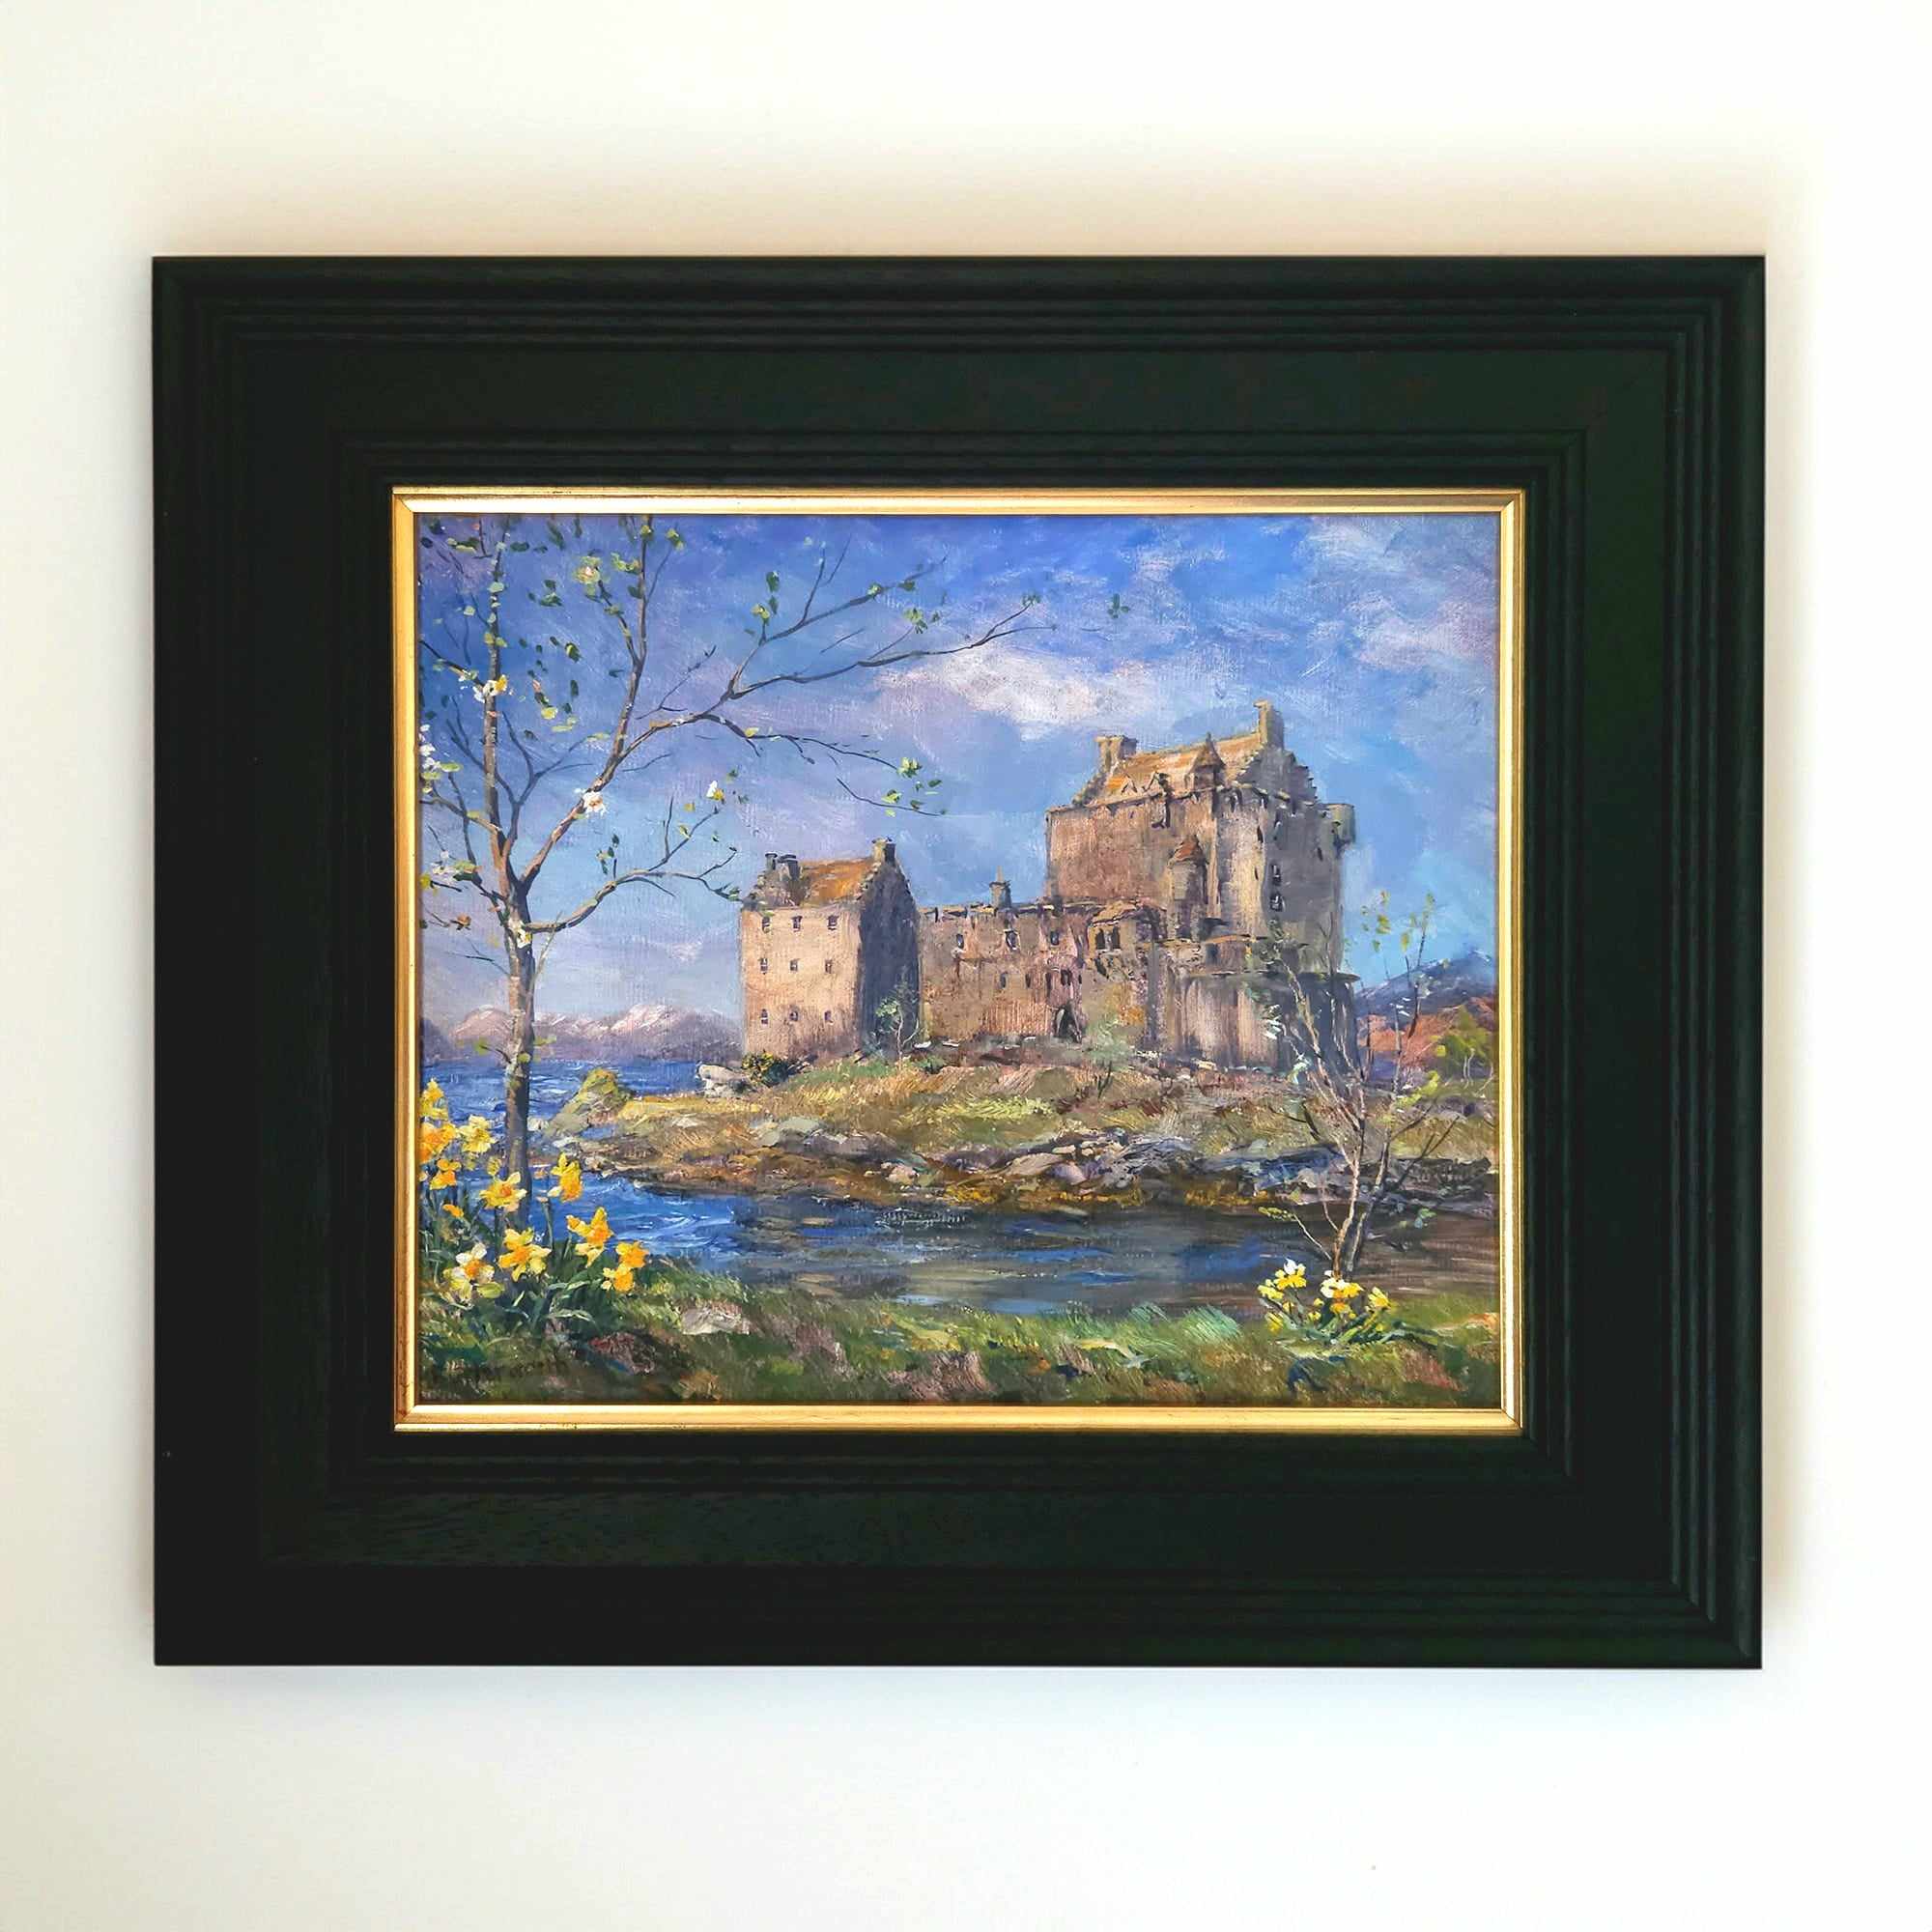 Spring sunshine on Eilean Donan Castle, with daffodils on the banks of Loch Duich in the Scottish Highlands.by artist Howard Butterworth